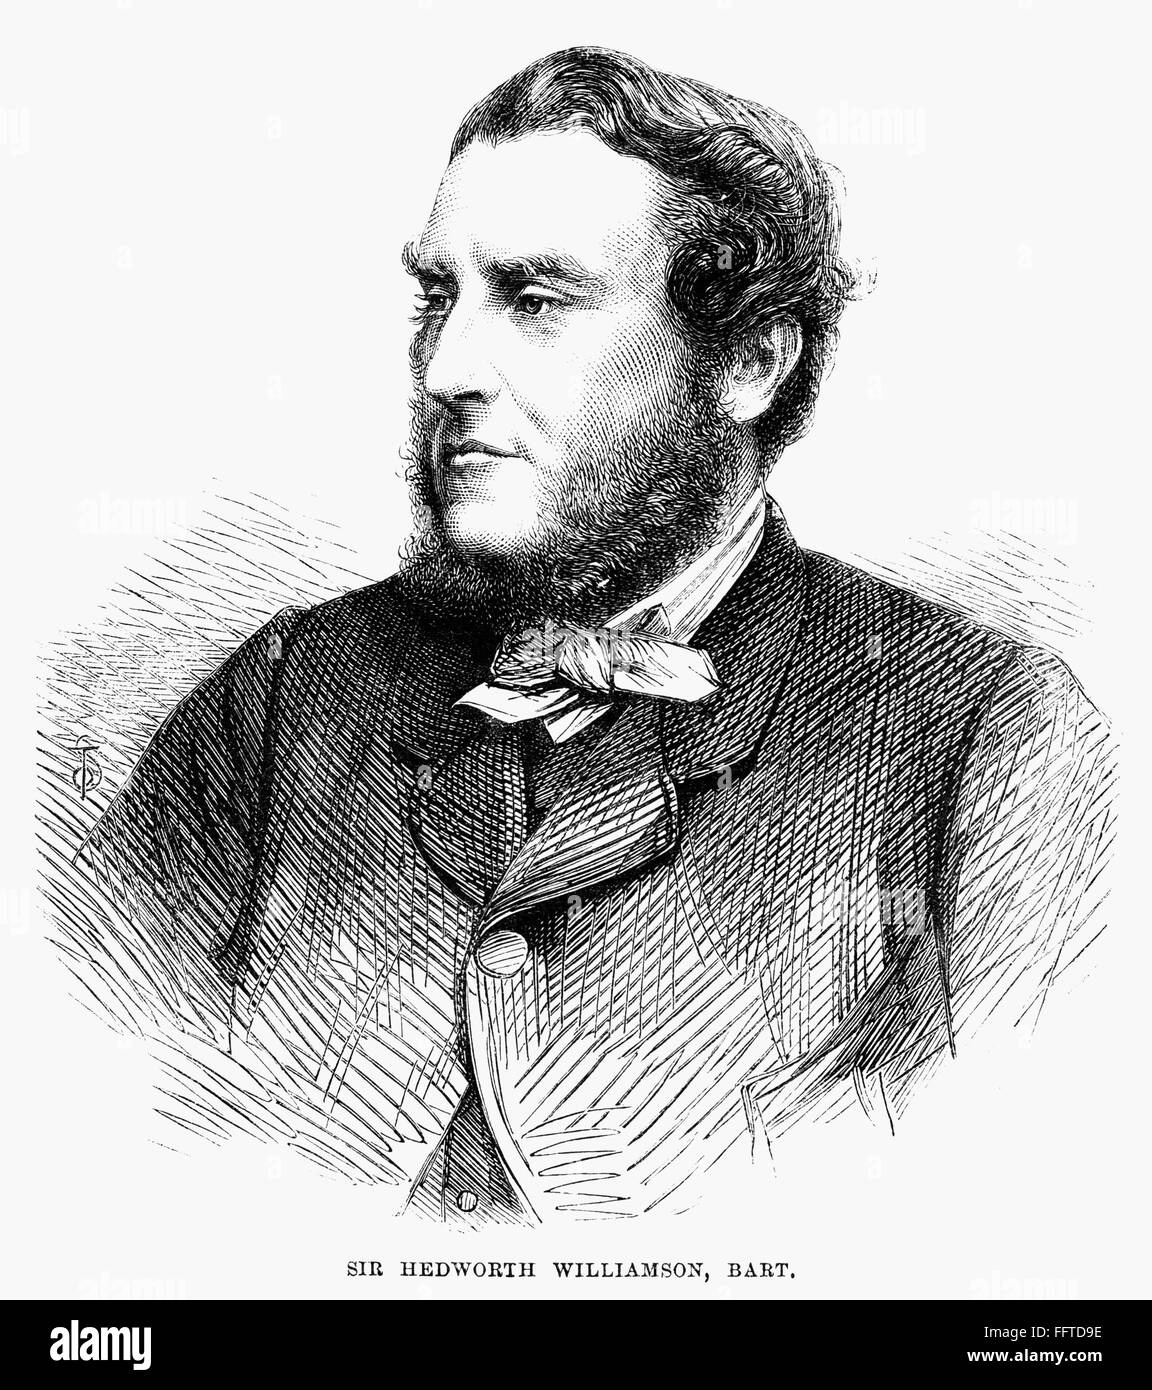 SIR HEDWORTH WILLIAMSON /n(1827-1900). 8th Baronet. British Liberal Party politician. Wood engraving, English, 1865. Stock Photo